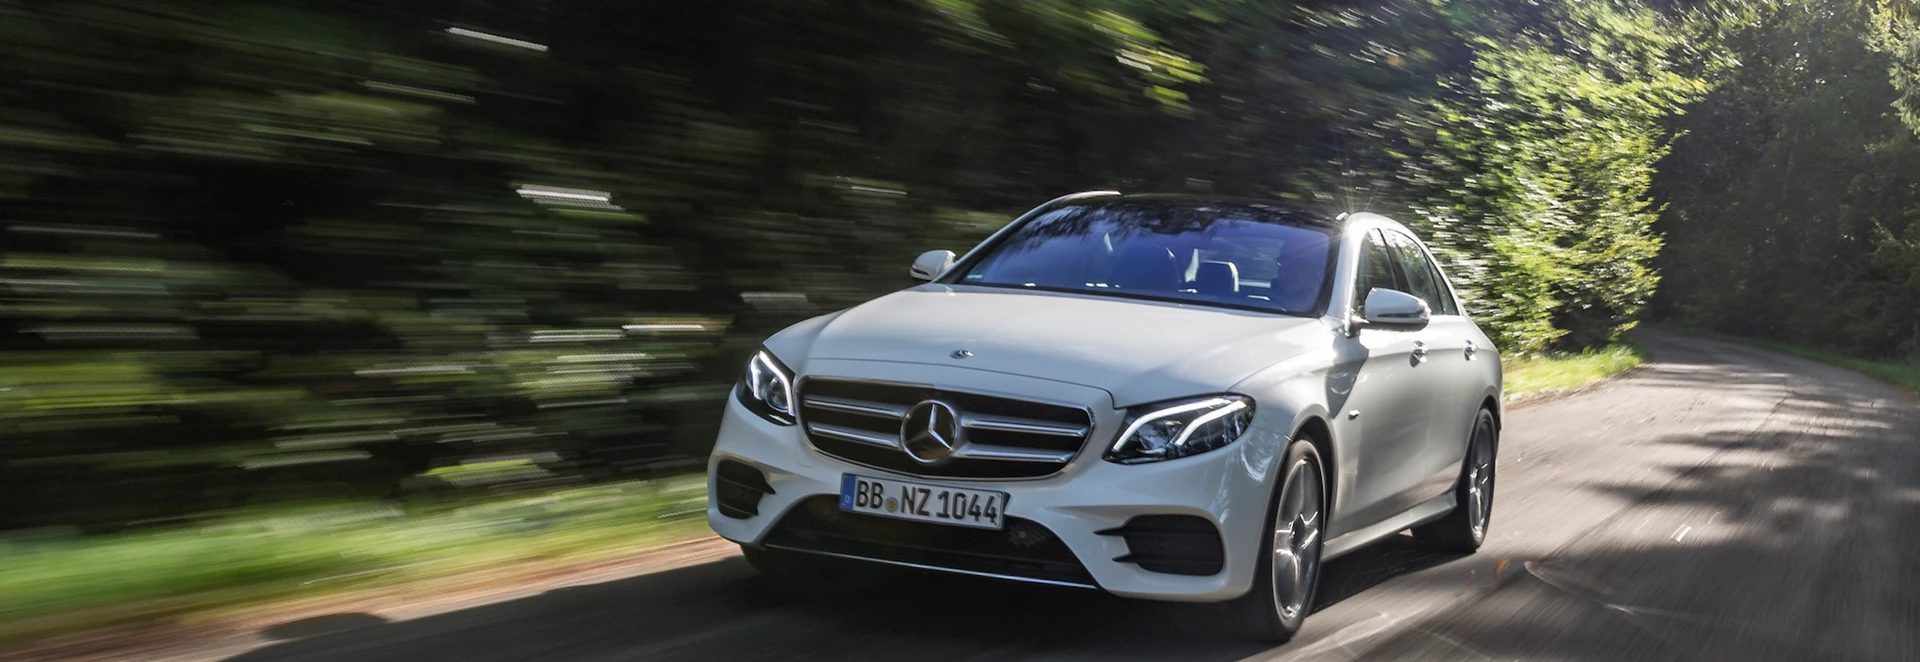 2019 Mercedes-Benz E-Class plug-in hybrid available to order now